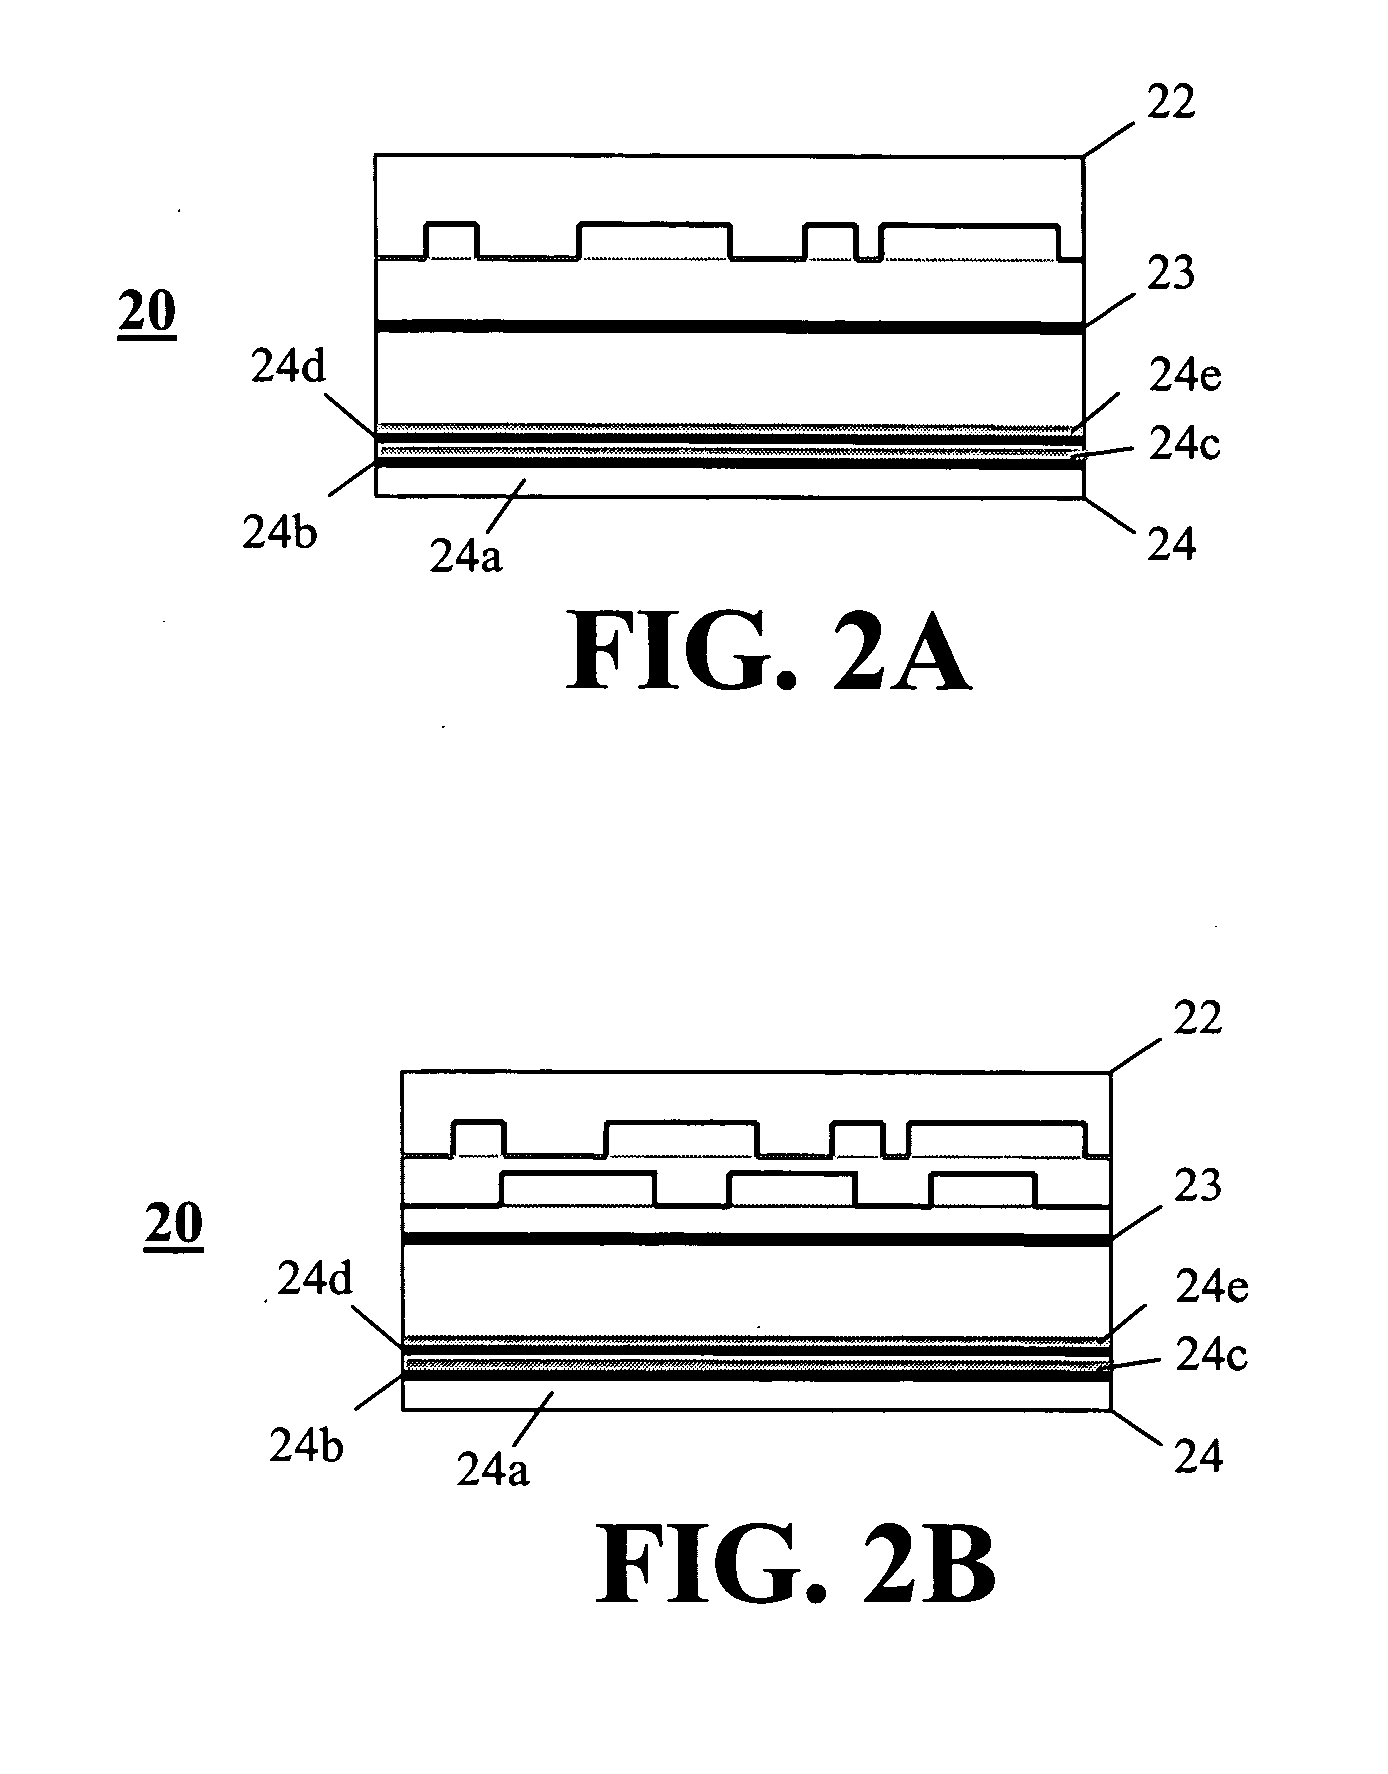 Bonded pre-recorded and pre-grooved optical disc